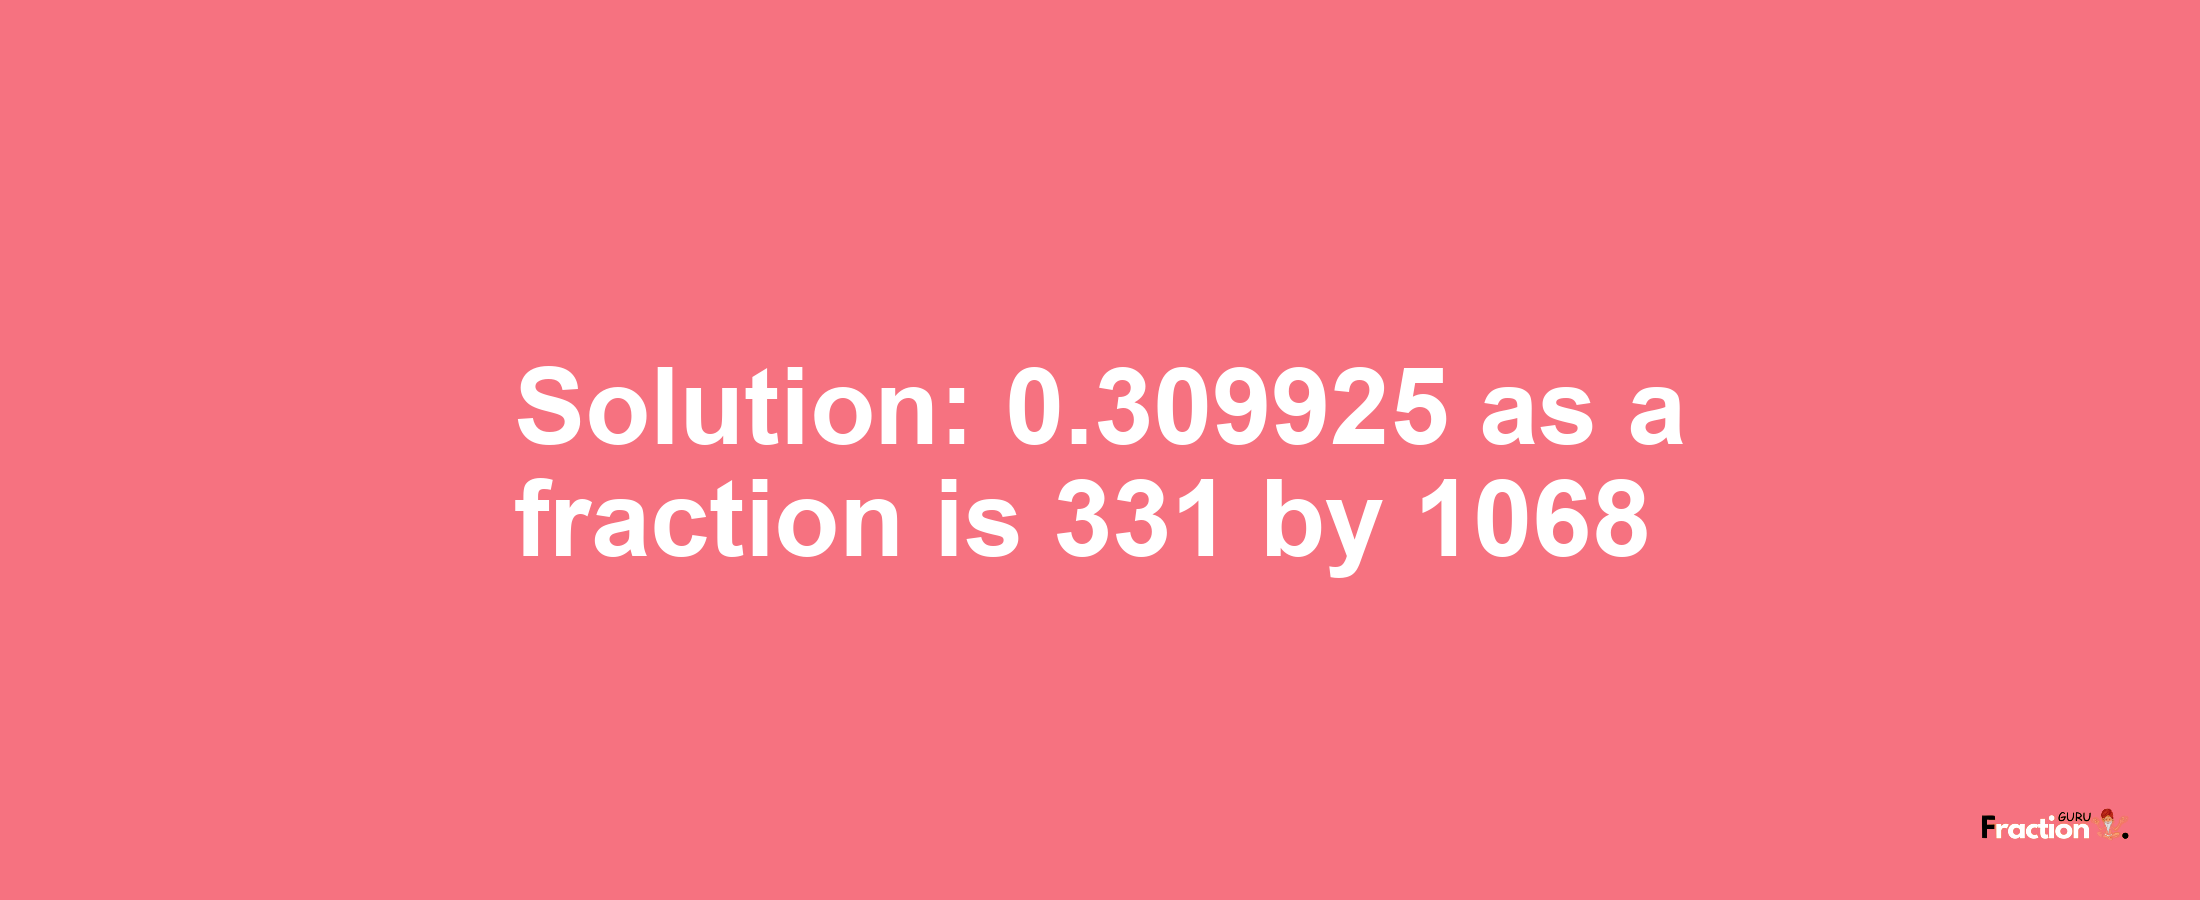 Solution:0.309925 as a fraction is 331/1068